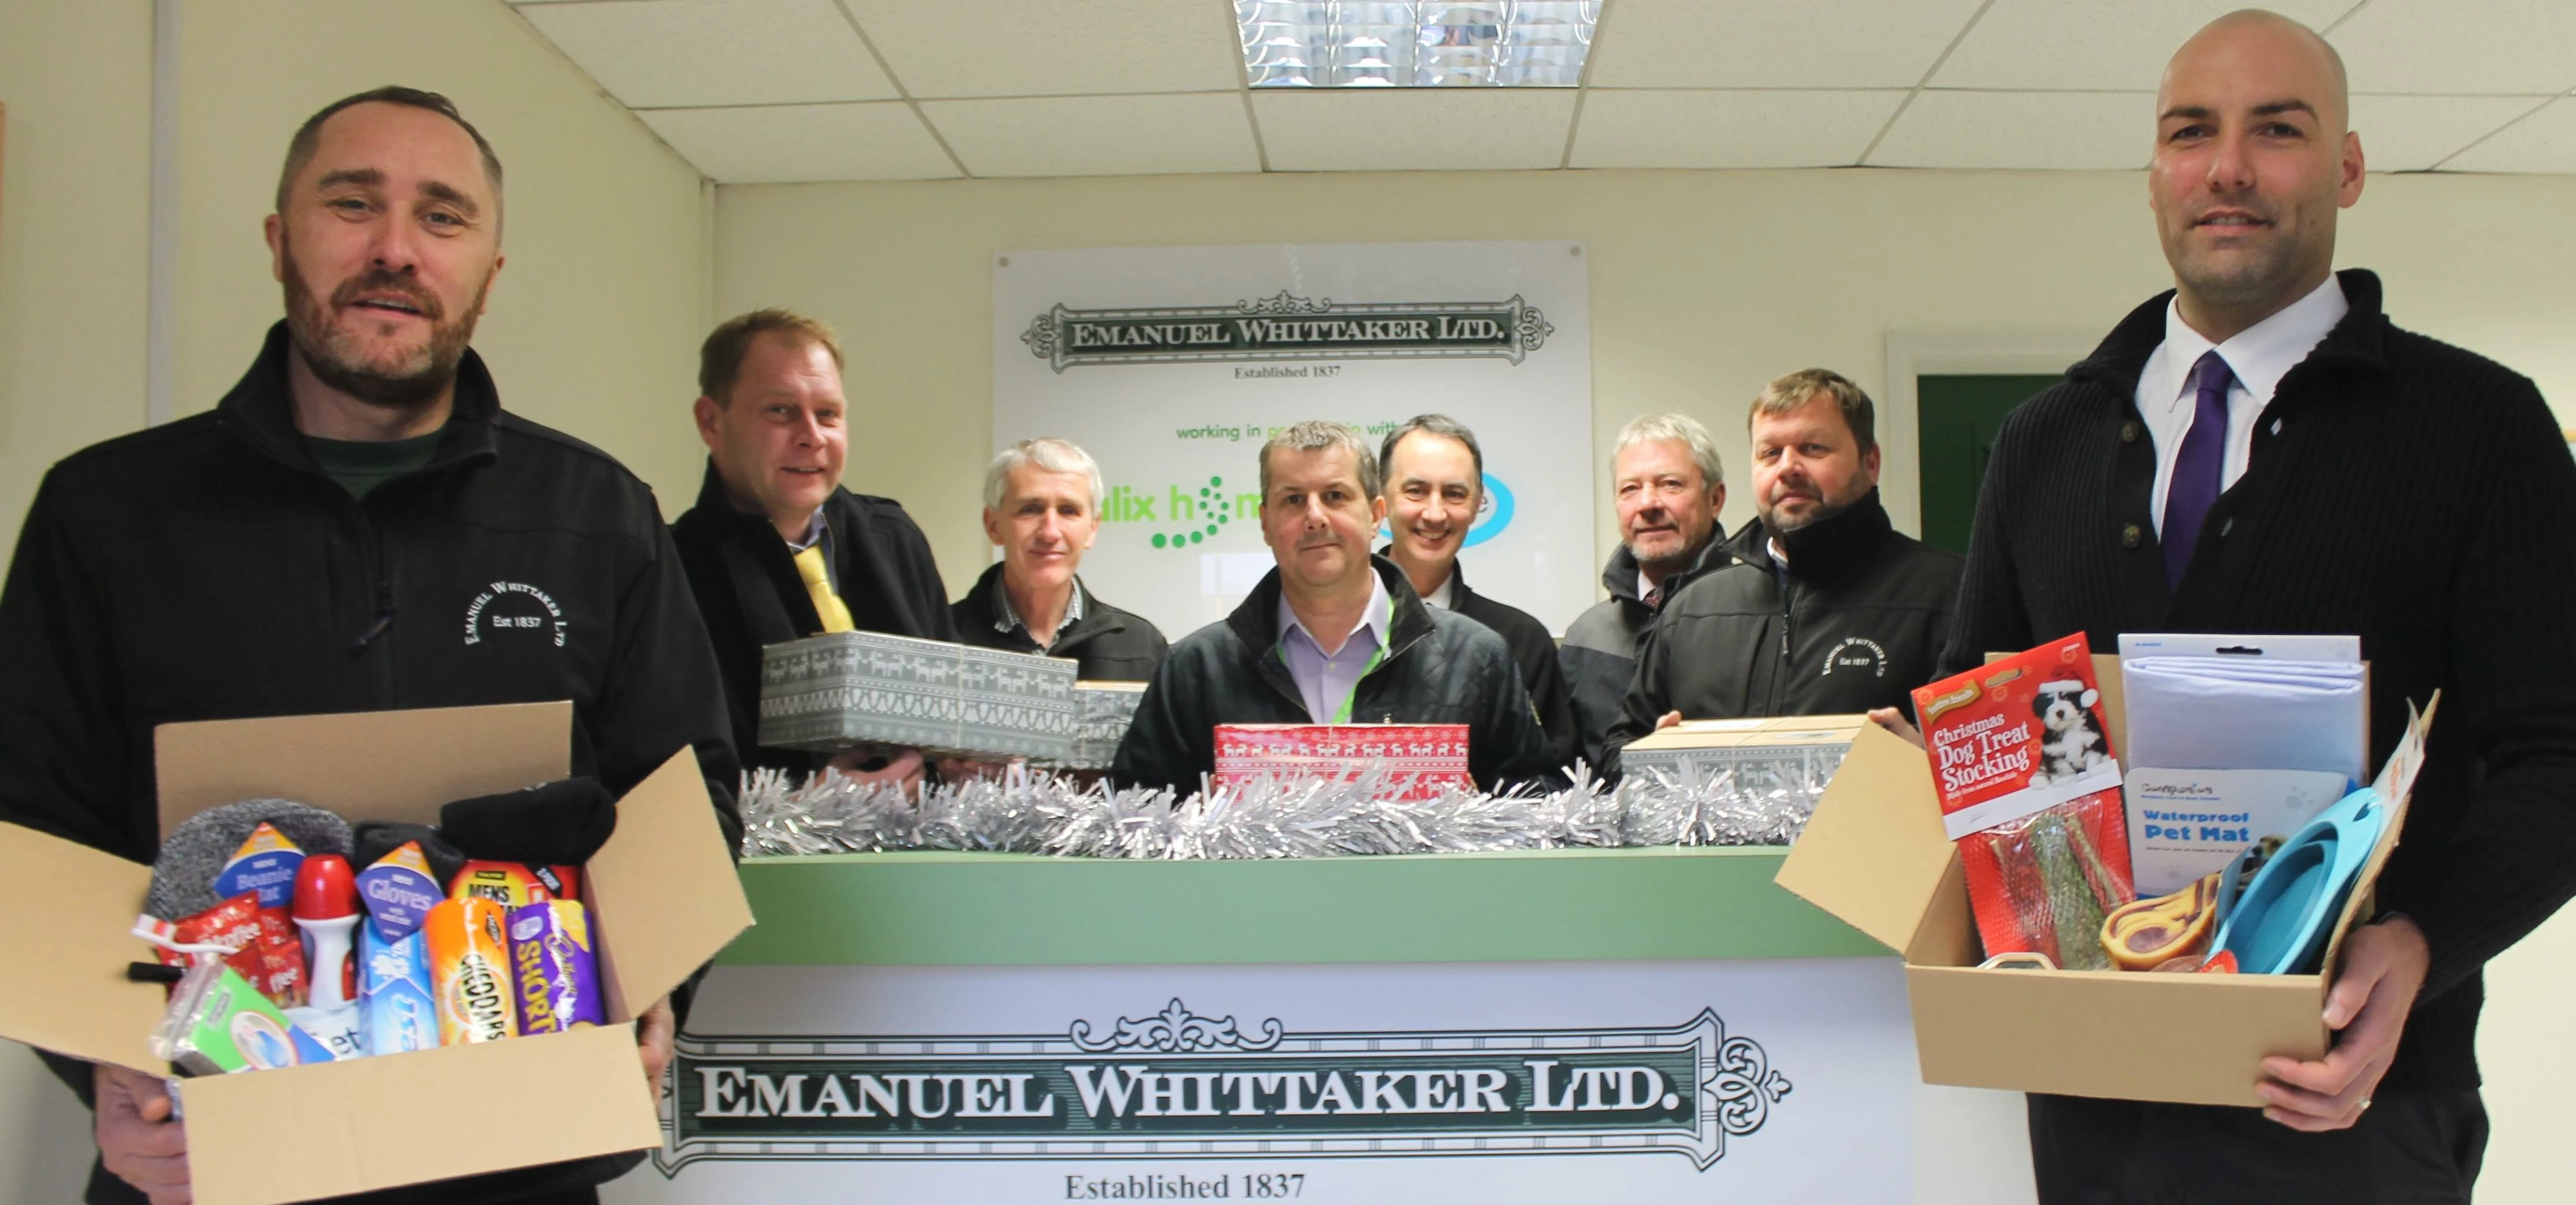 Emanuel Whittaker and friends with their shoeboxes 